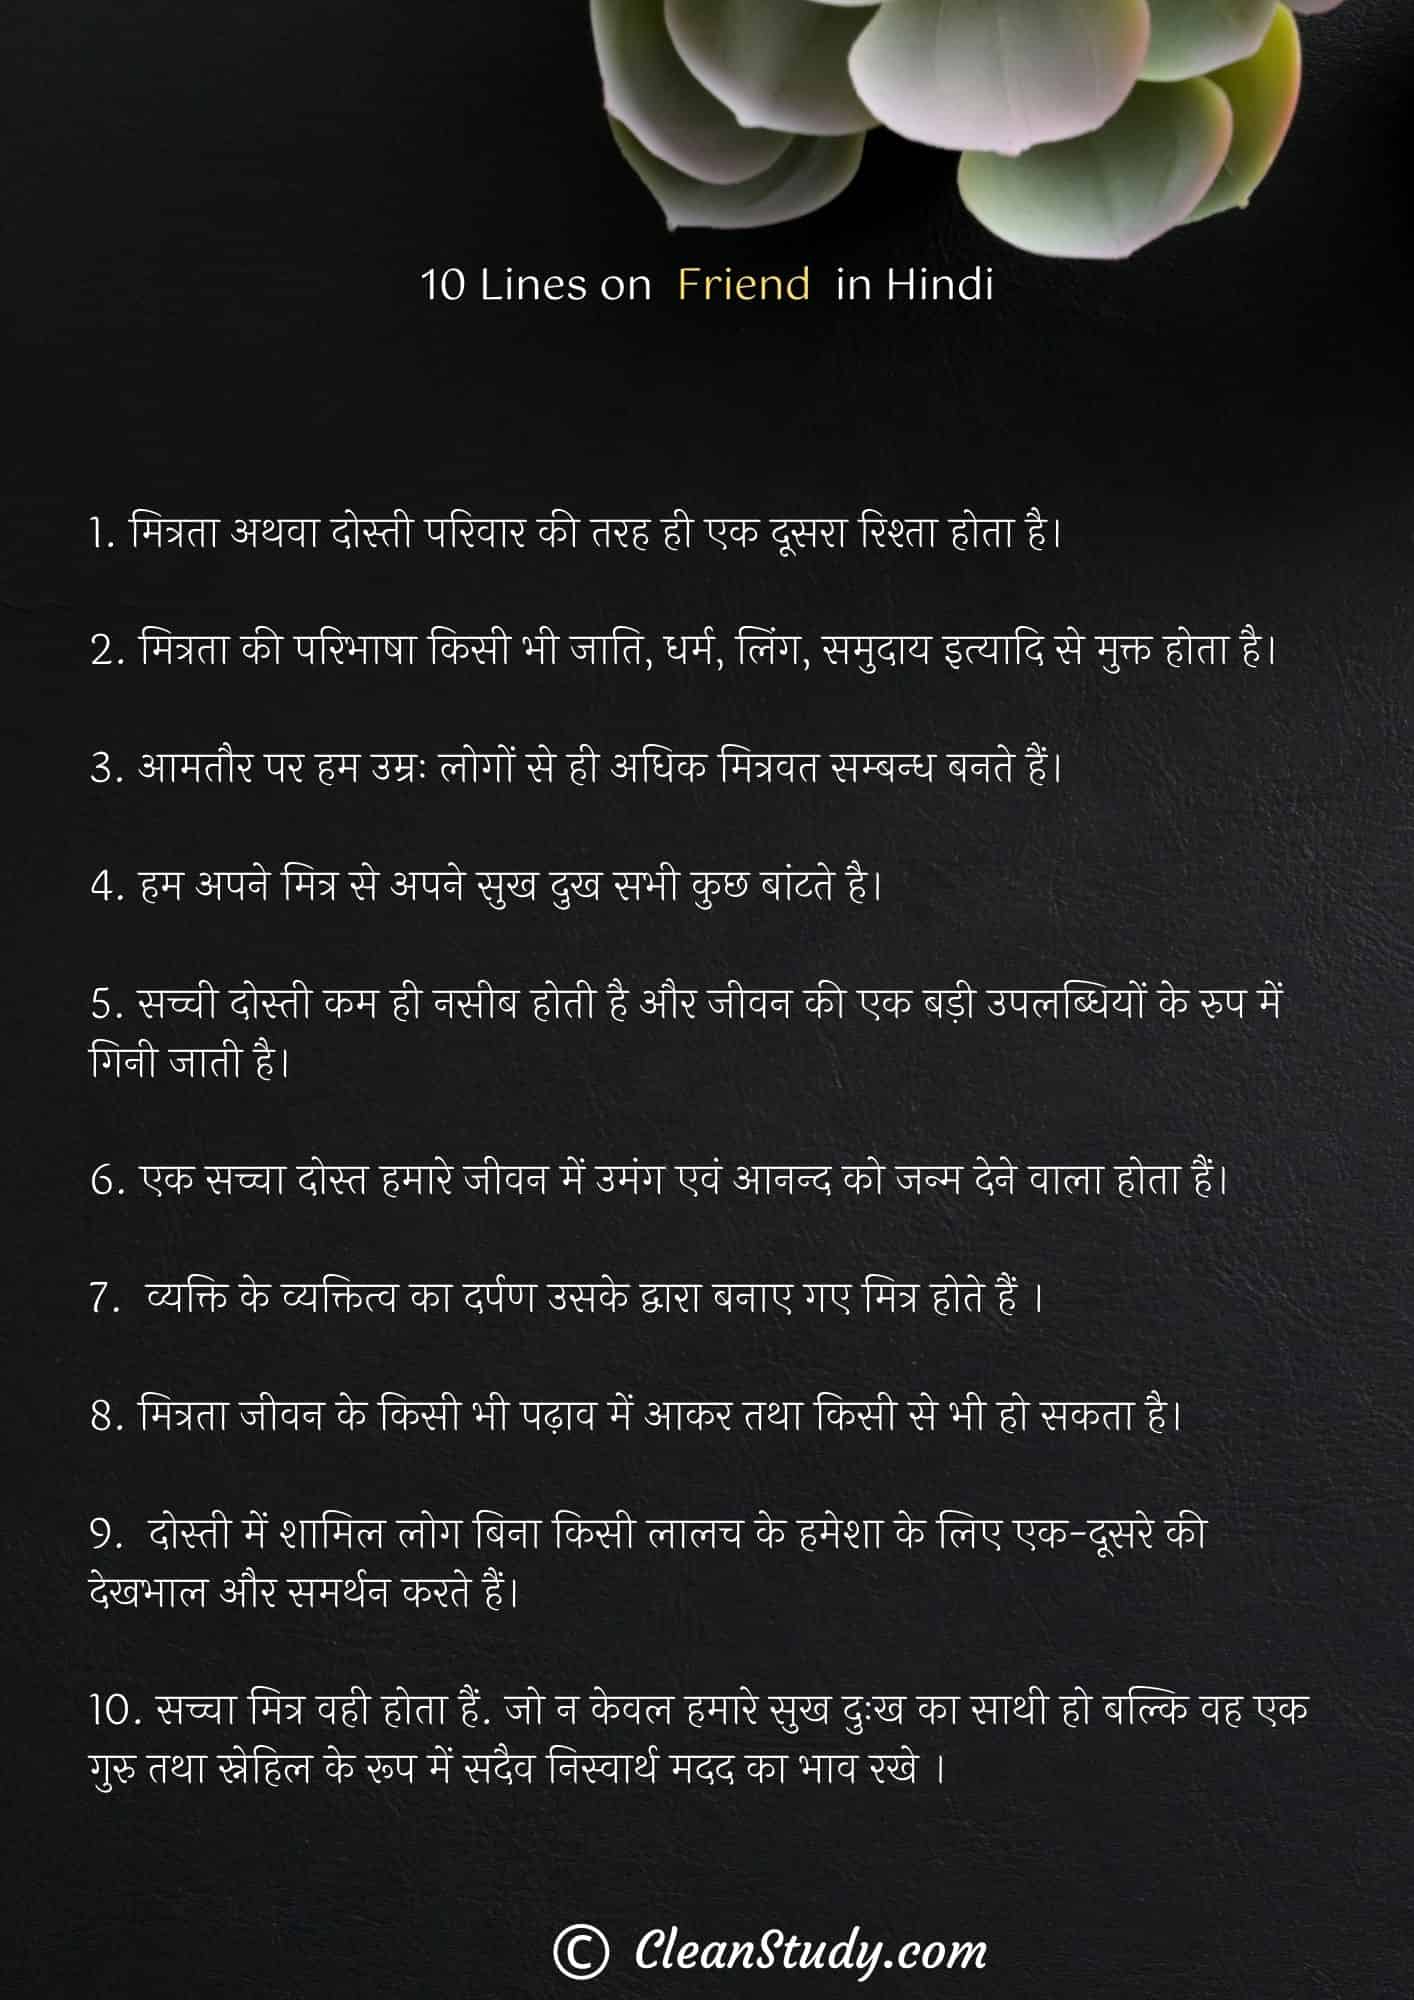 10 Lines on Friend in Hindi